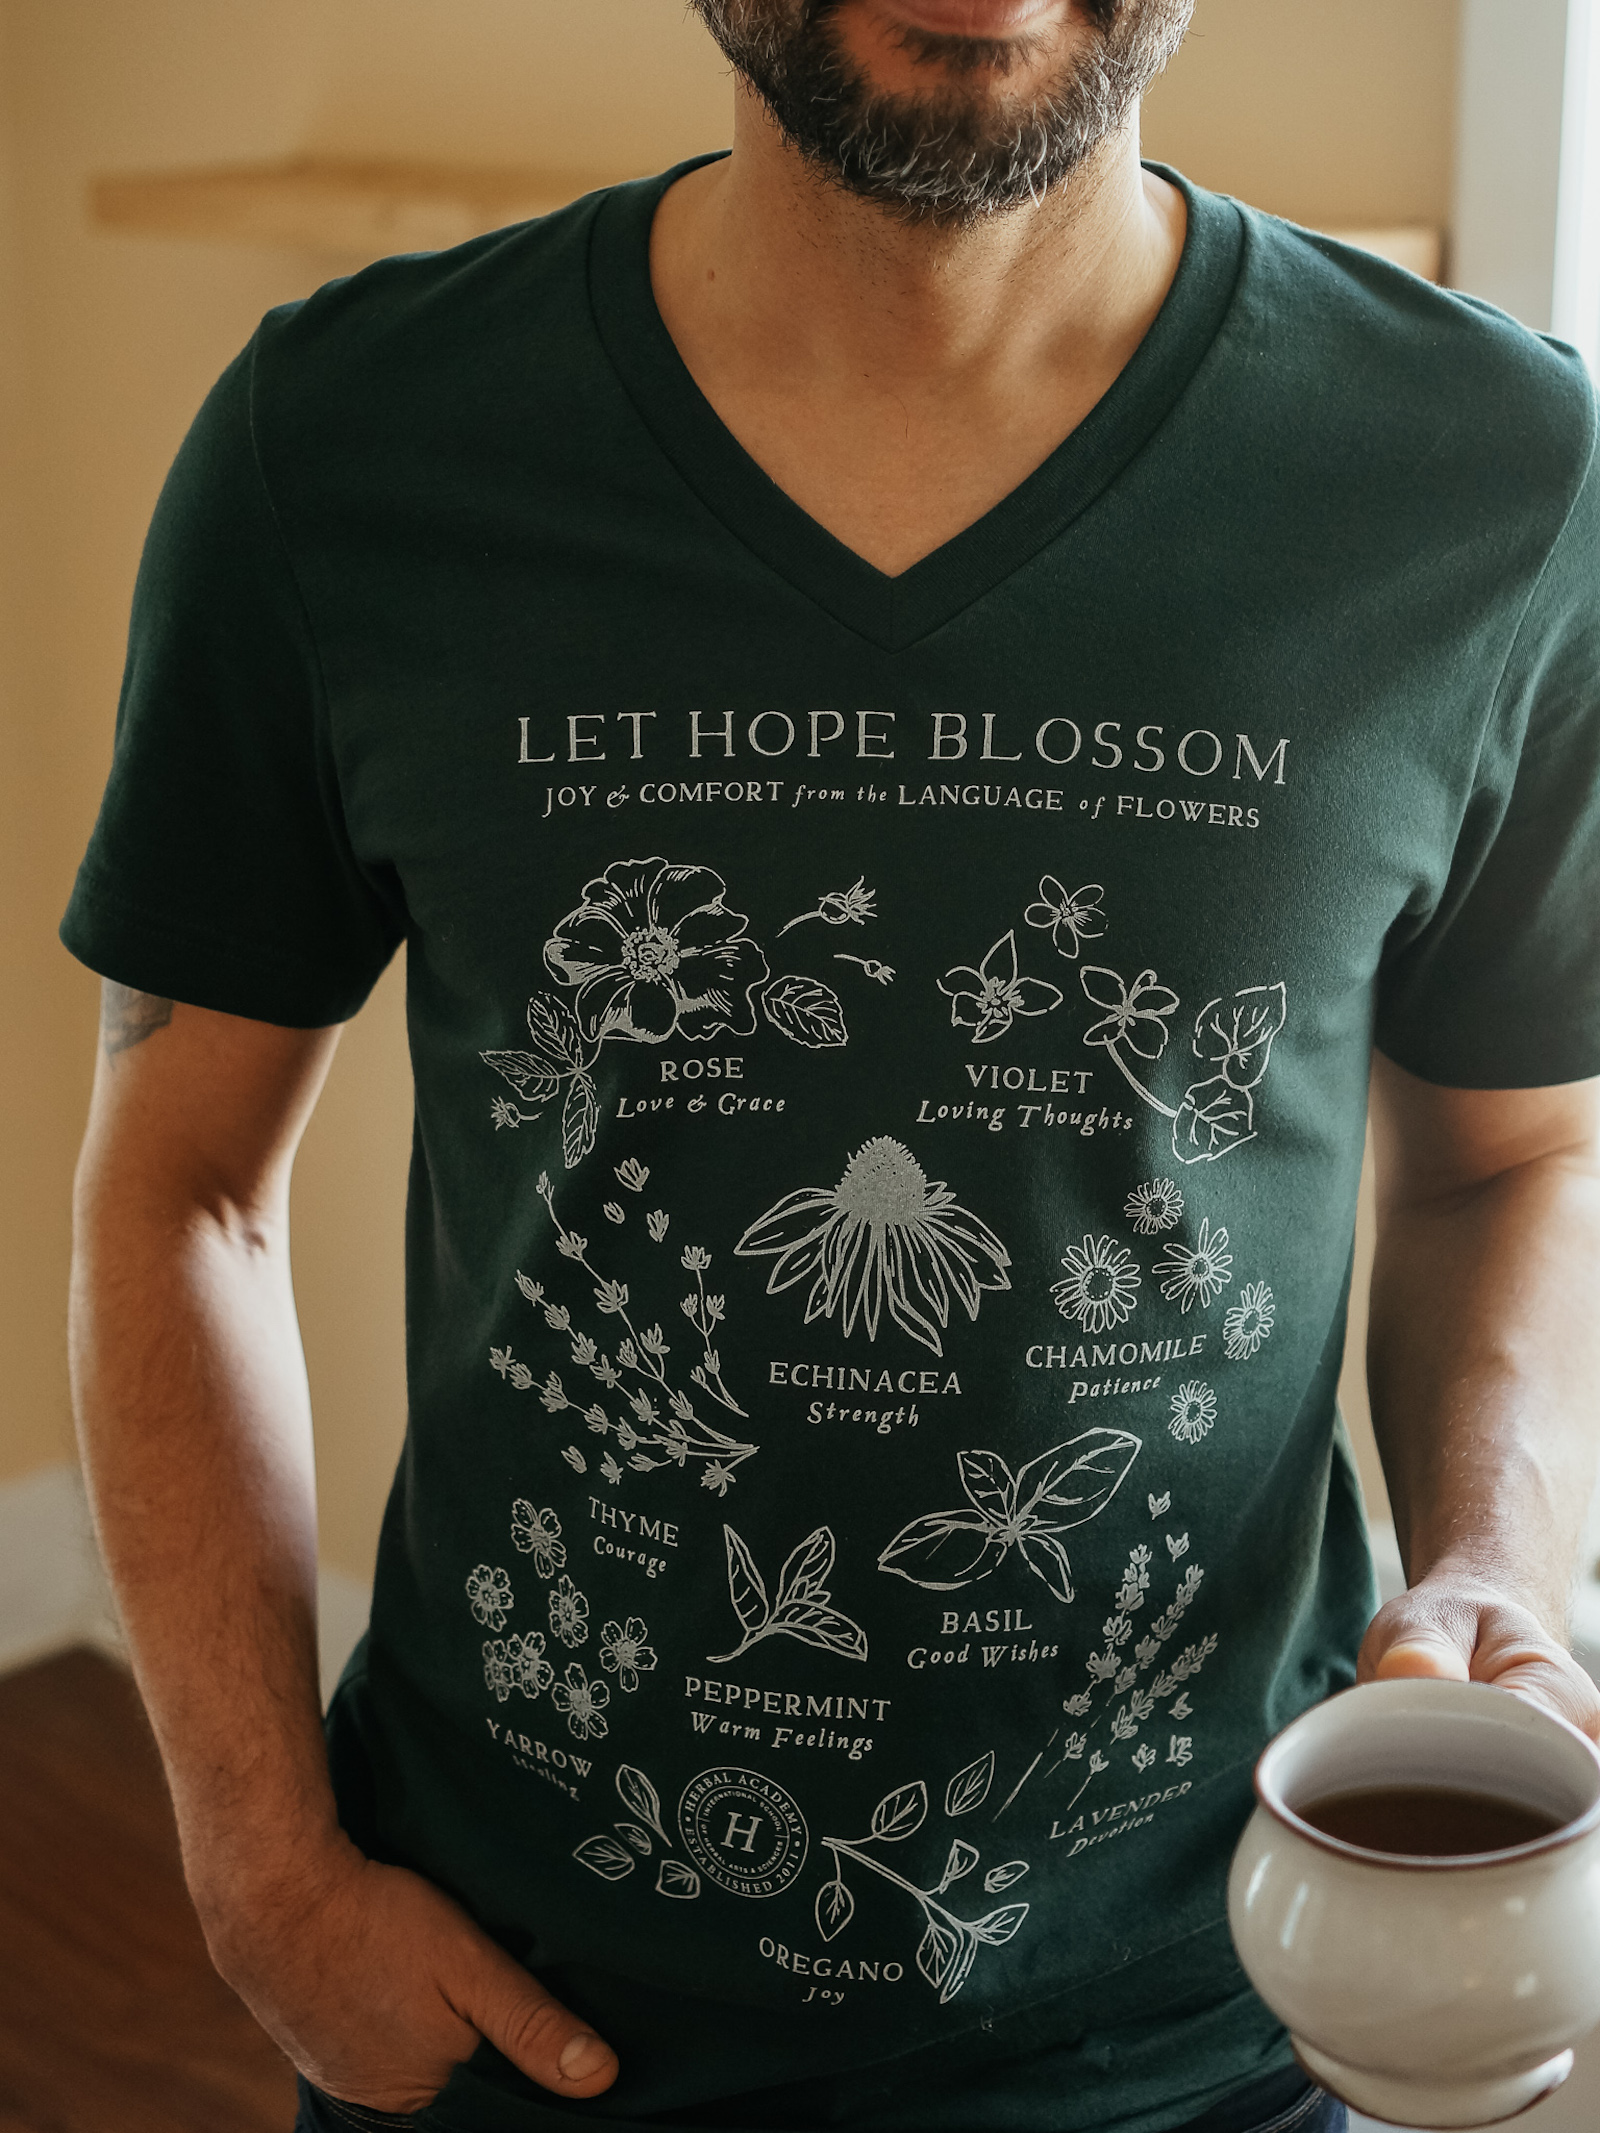 Let Hope Blossom Botanical Tshirt by Herbal Academy - Flower Meanings